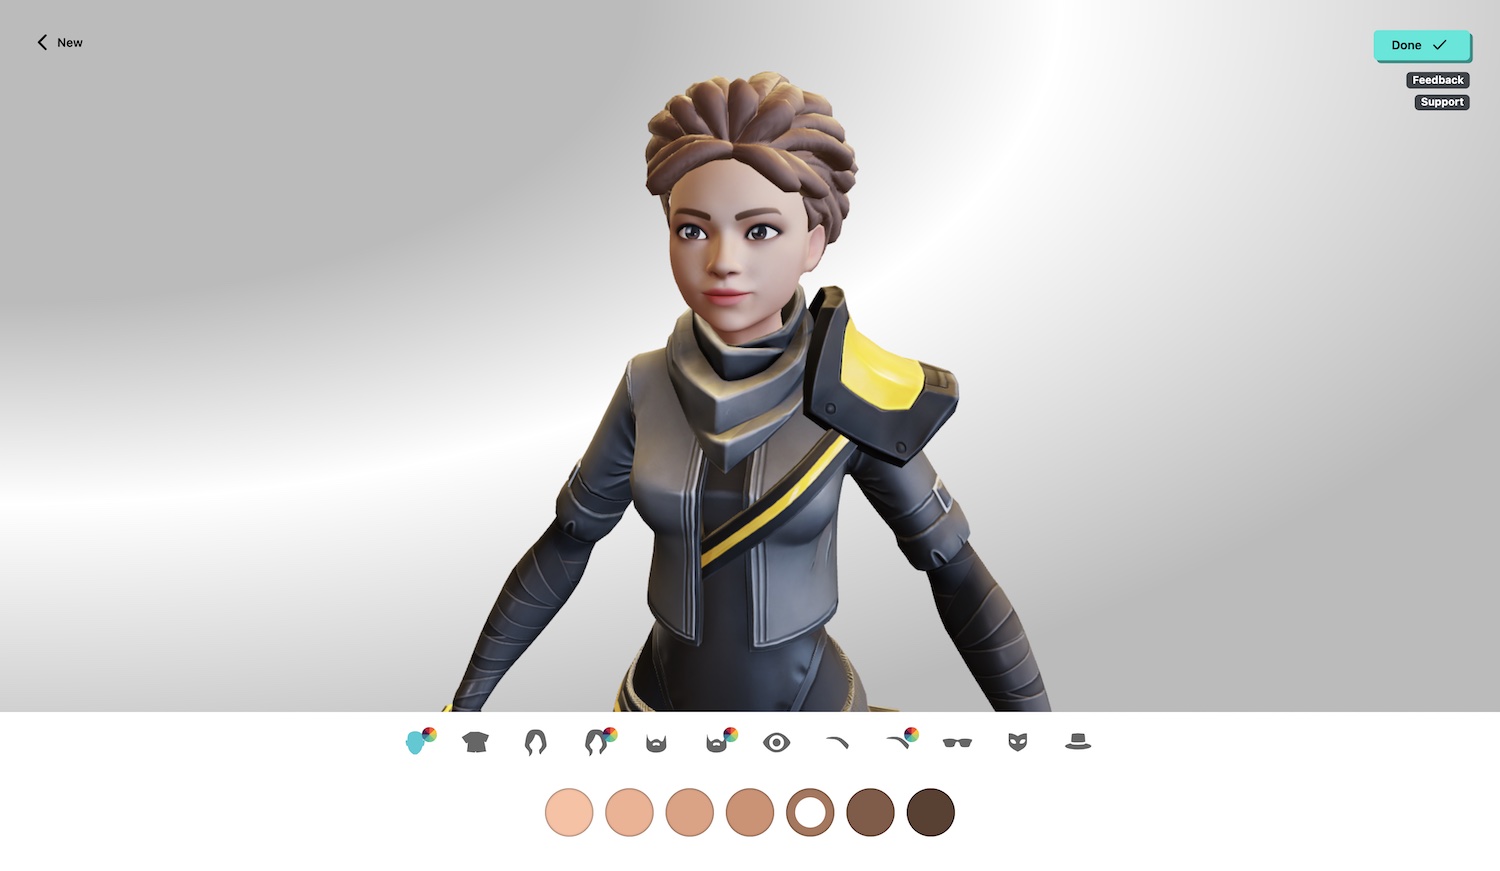 Selfie to a Personal Full-Body 3D Avatar Maker